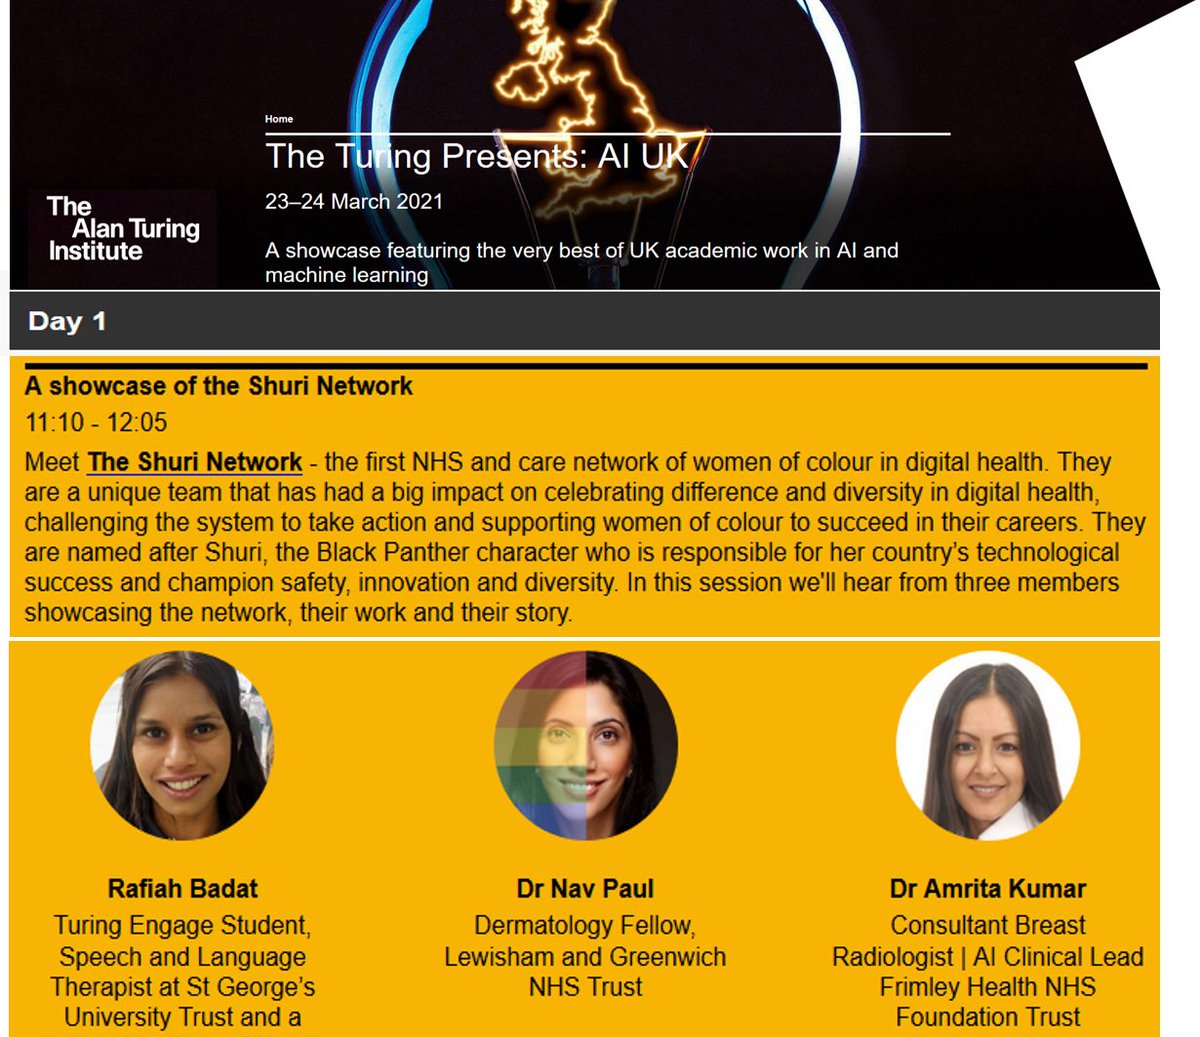 😊to be spotlighting @NetworkShuri with @DrAmritaKumar @DrNavPaul @GhazelMukhtar at @turinginst #AIUK 23rd Mar #inclusiveAI 
Pls join & retweet to bridge tech>research>health/social care.  Will now tag all (sorry-not sorry)
Tickets (DM for assistance): turing.ac.uk/ai-uk